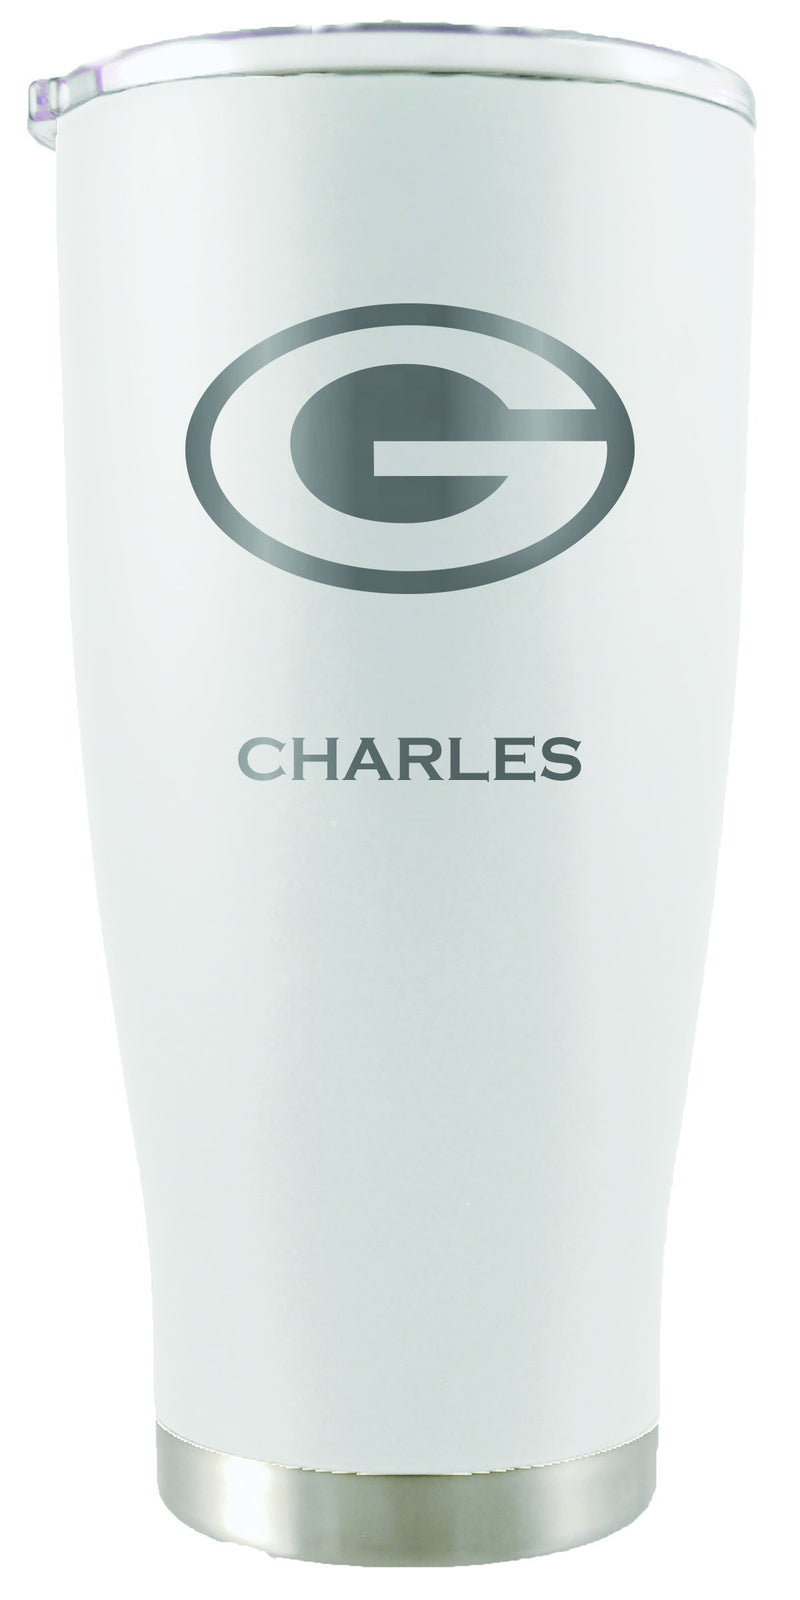 20oz White Personalized Stainless Steel Tumbler | Green Bay Packers
CurrentProduct, Drinkware_category_All, GBP, Green Bay Packers, NFL, Personalized_Personalized, Stainless Steel
The Memory Company